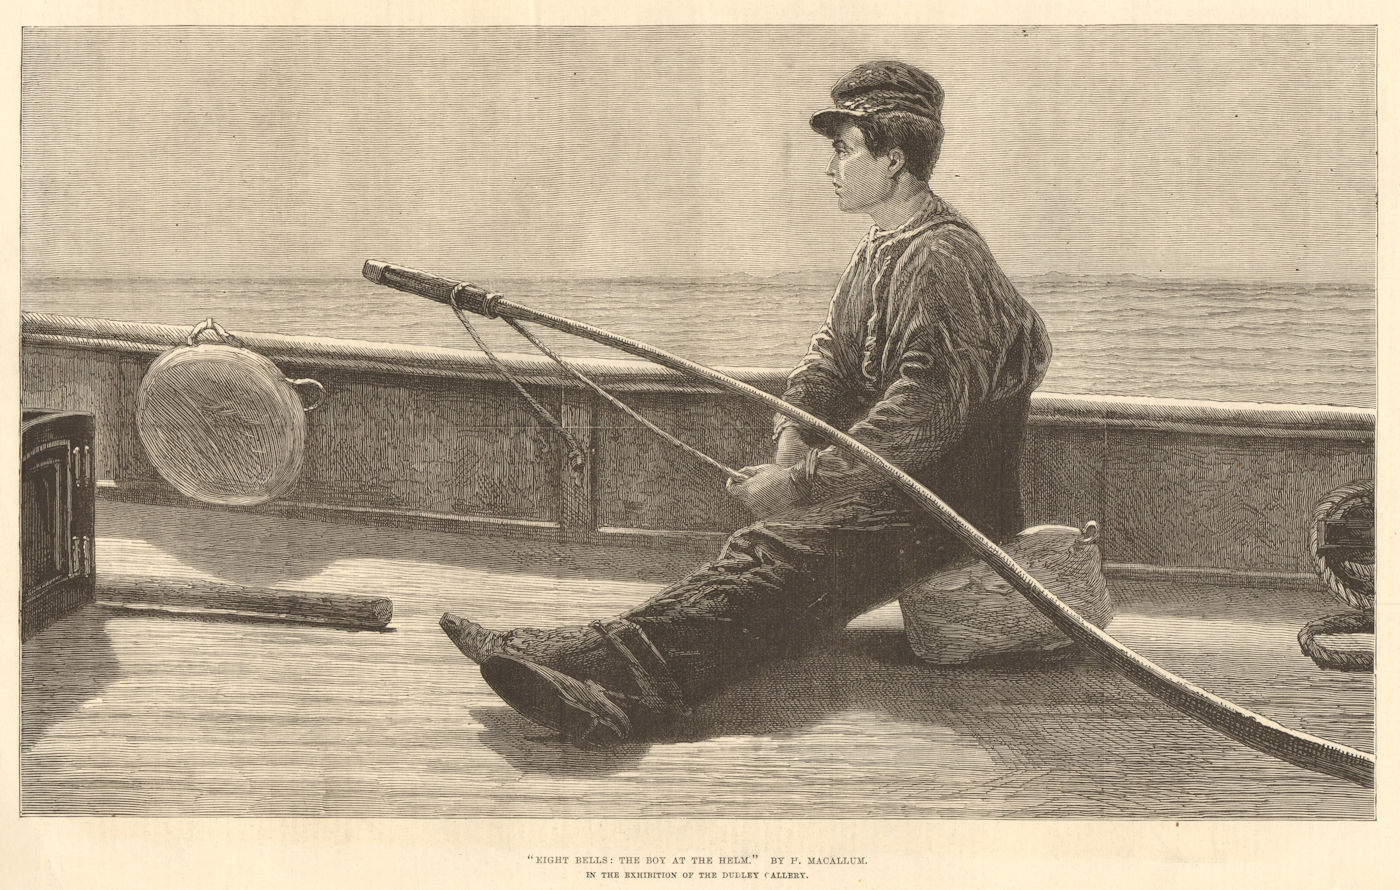 Associate Product "Eight bells: The boy at the helm", by H. Macallum. Boats. Children 1876